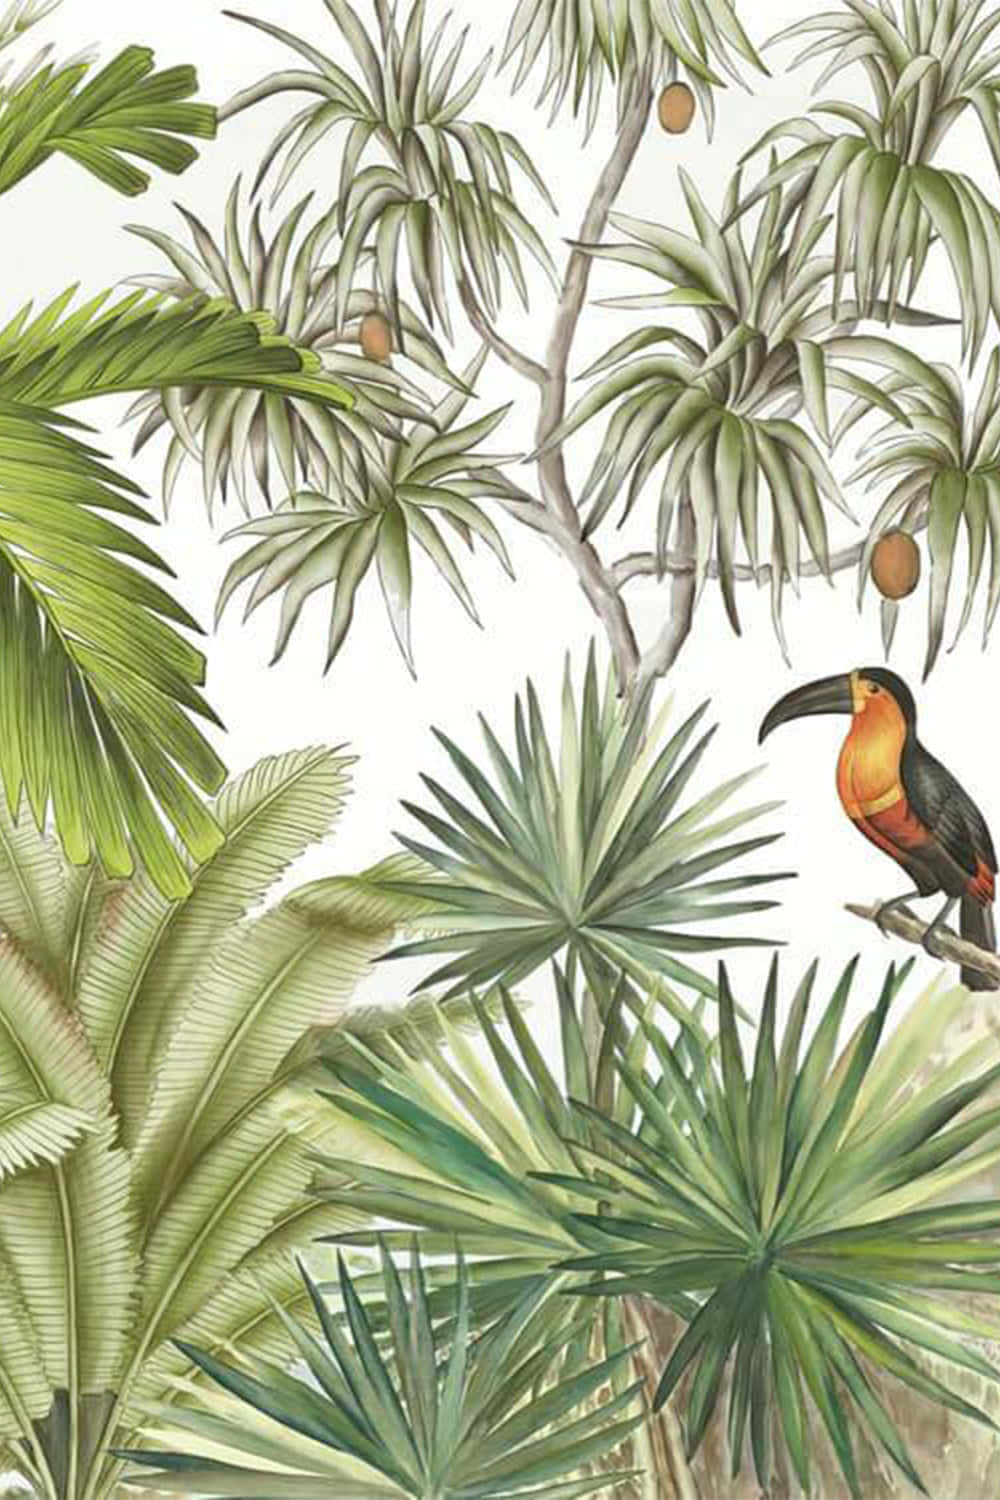 A Painting Of A Tropical Scene With A Bird And Palm Trees